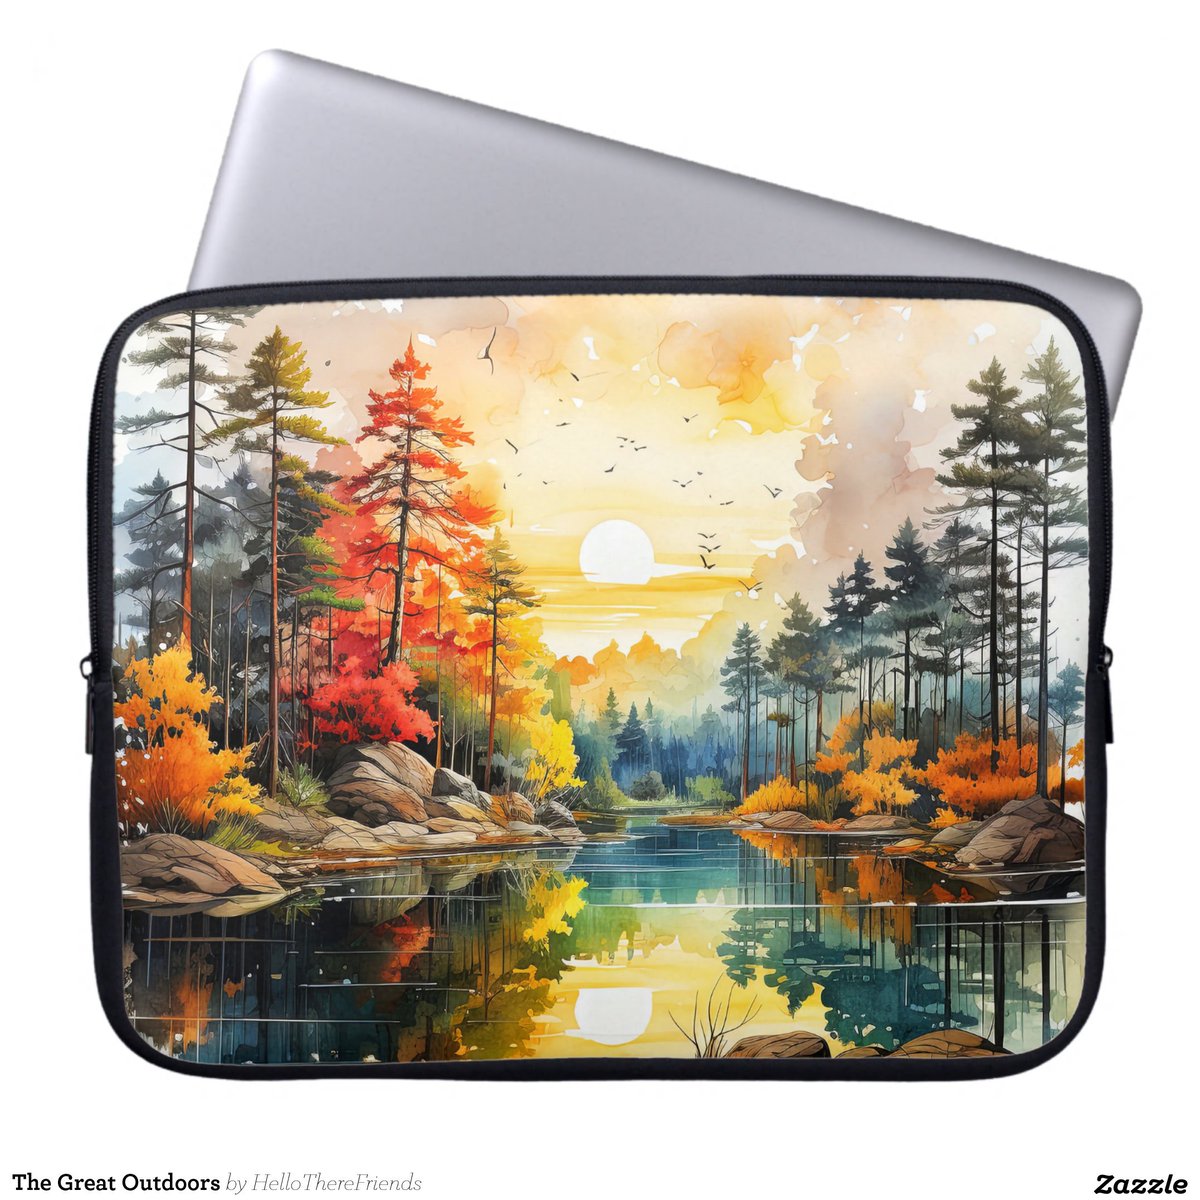 The Great Outdoors Laptop Sleeve→zazzle.com/z/k4oihlk1?rf=…

#LaptopSleeves #LaptopAccessories #Sleeves #TravelBag #Accessories #Cases #BackToSchool #GiftIdeas #FathersDay